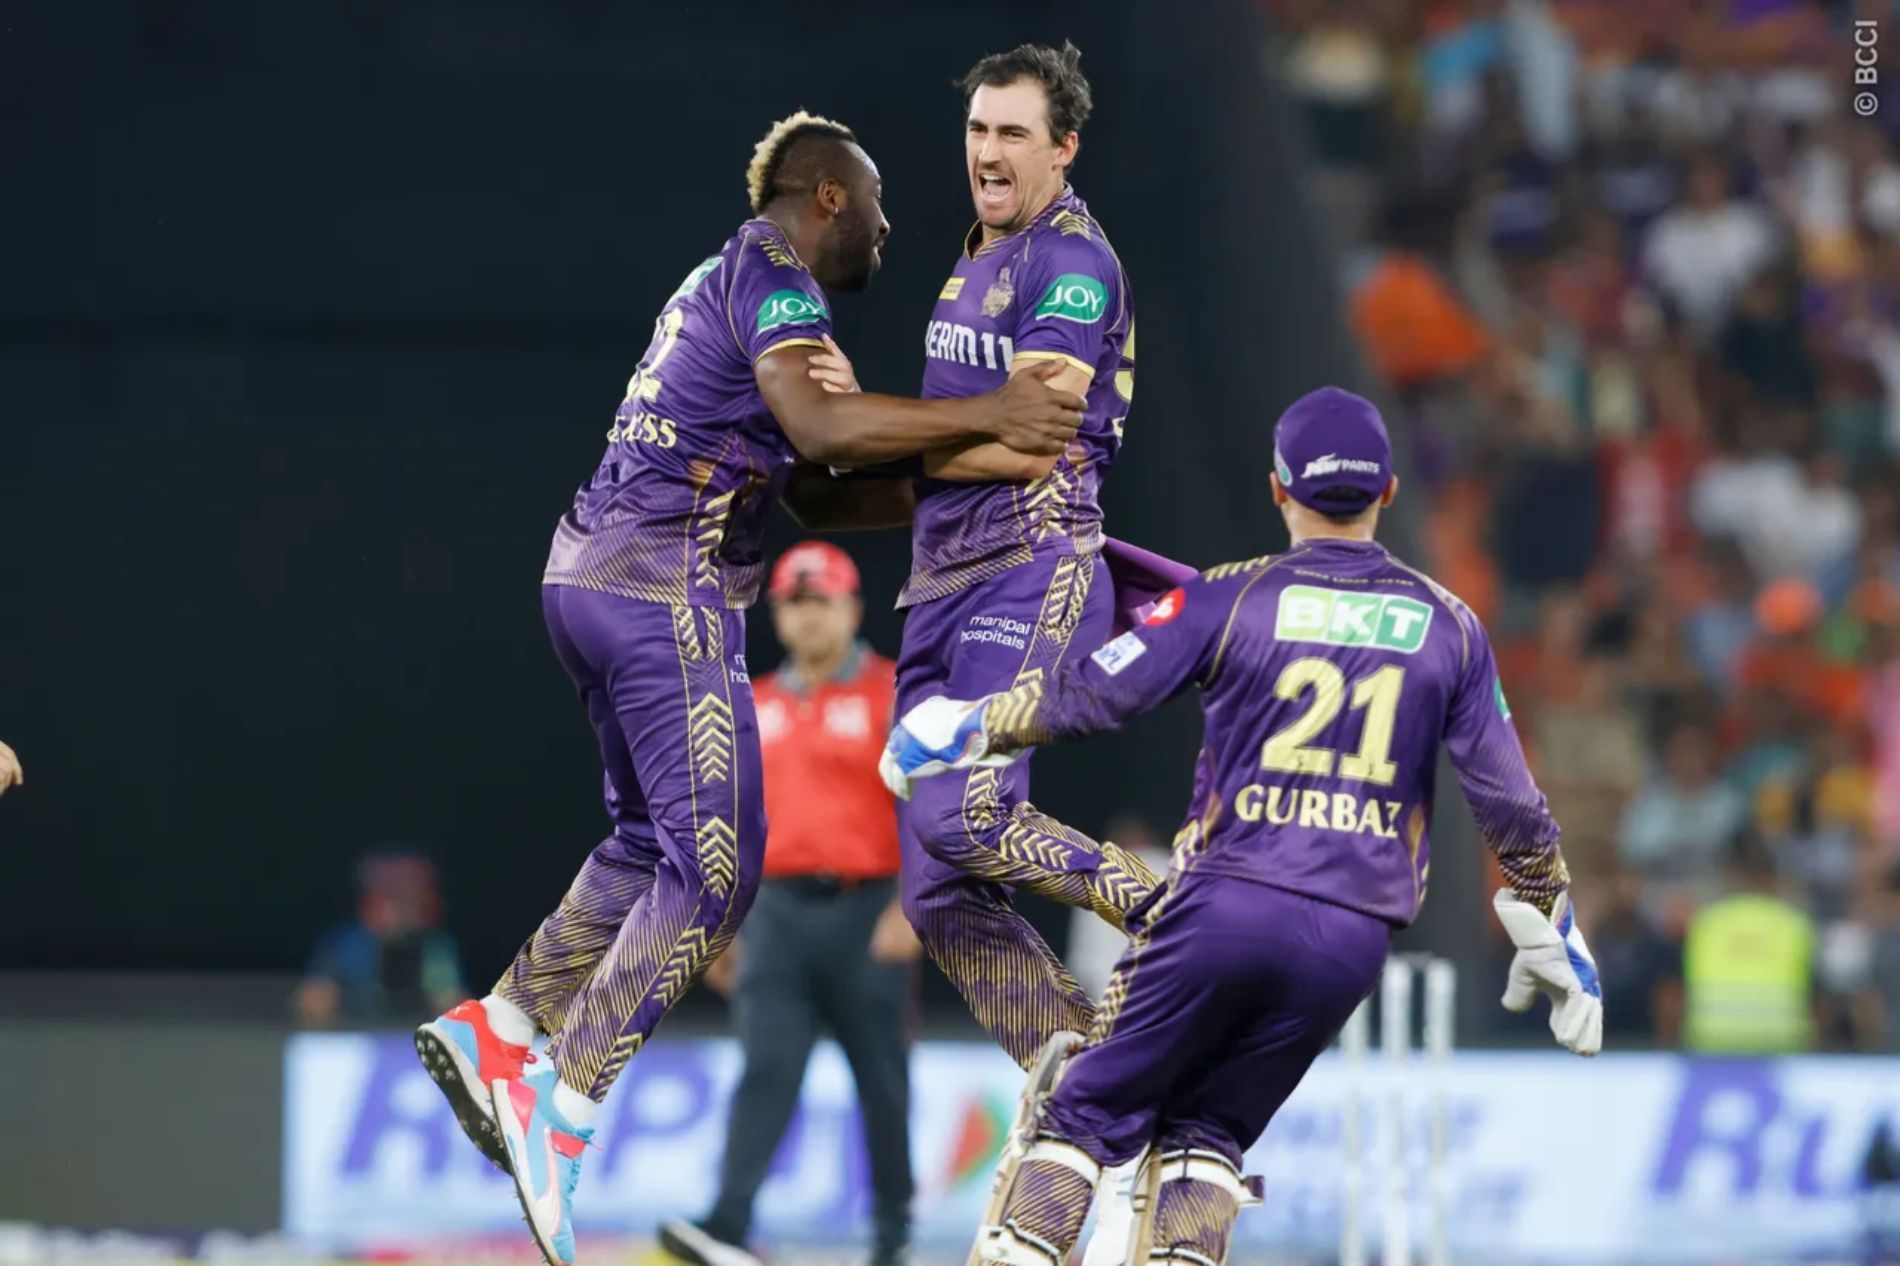 KKR left-arm pacer Mitchell Starc stood out with figures of 3-34. (Image Credit: BCCI/ iplt20.com)